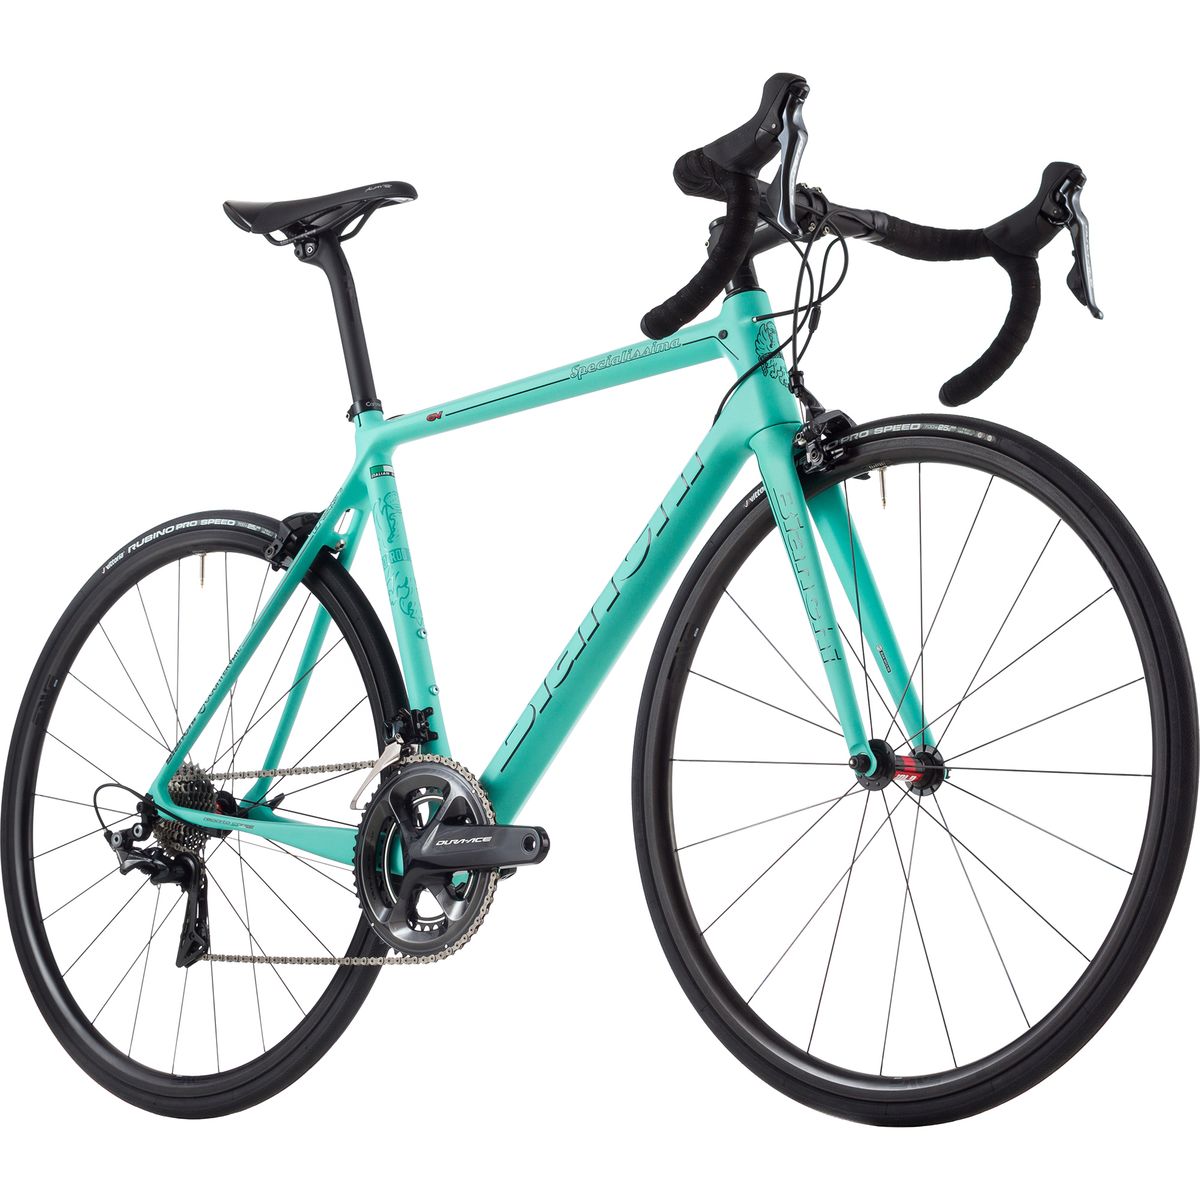 Bianchi Specialissima Dura Ace R9100 Complete Road Bike 2017